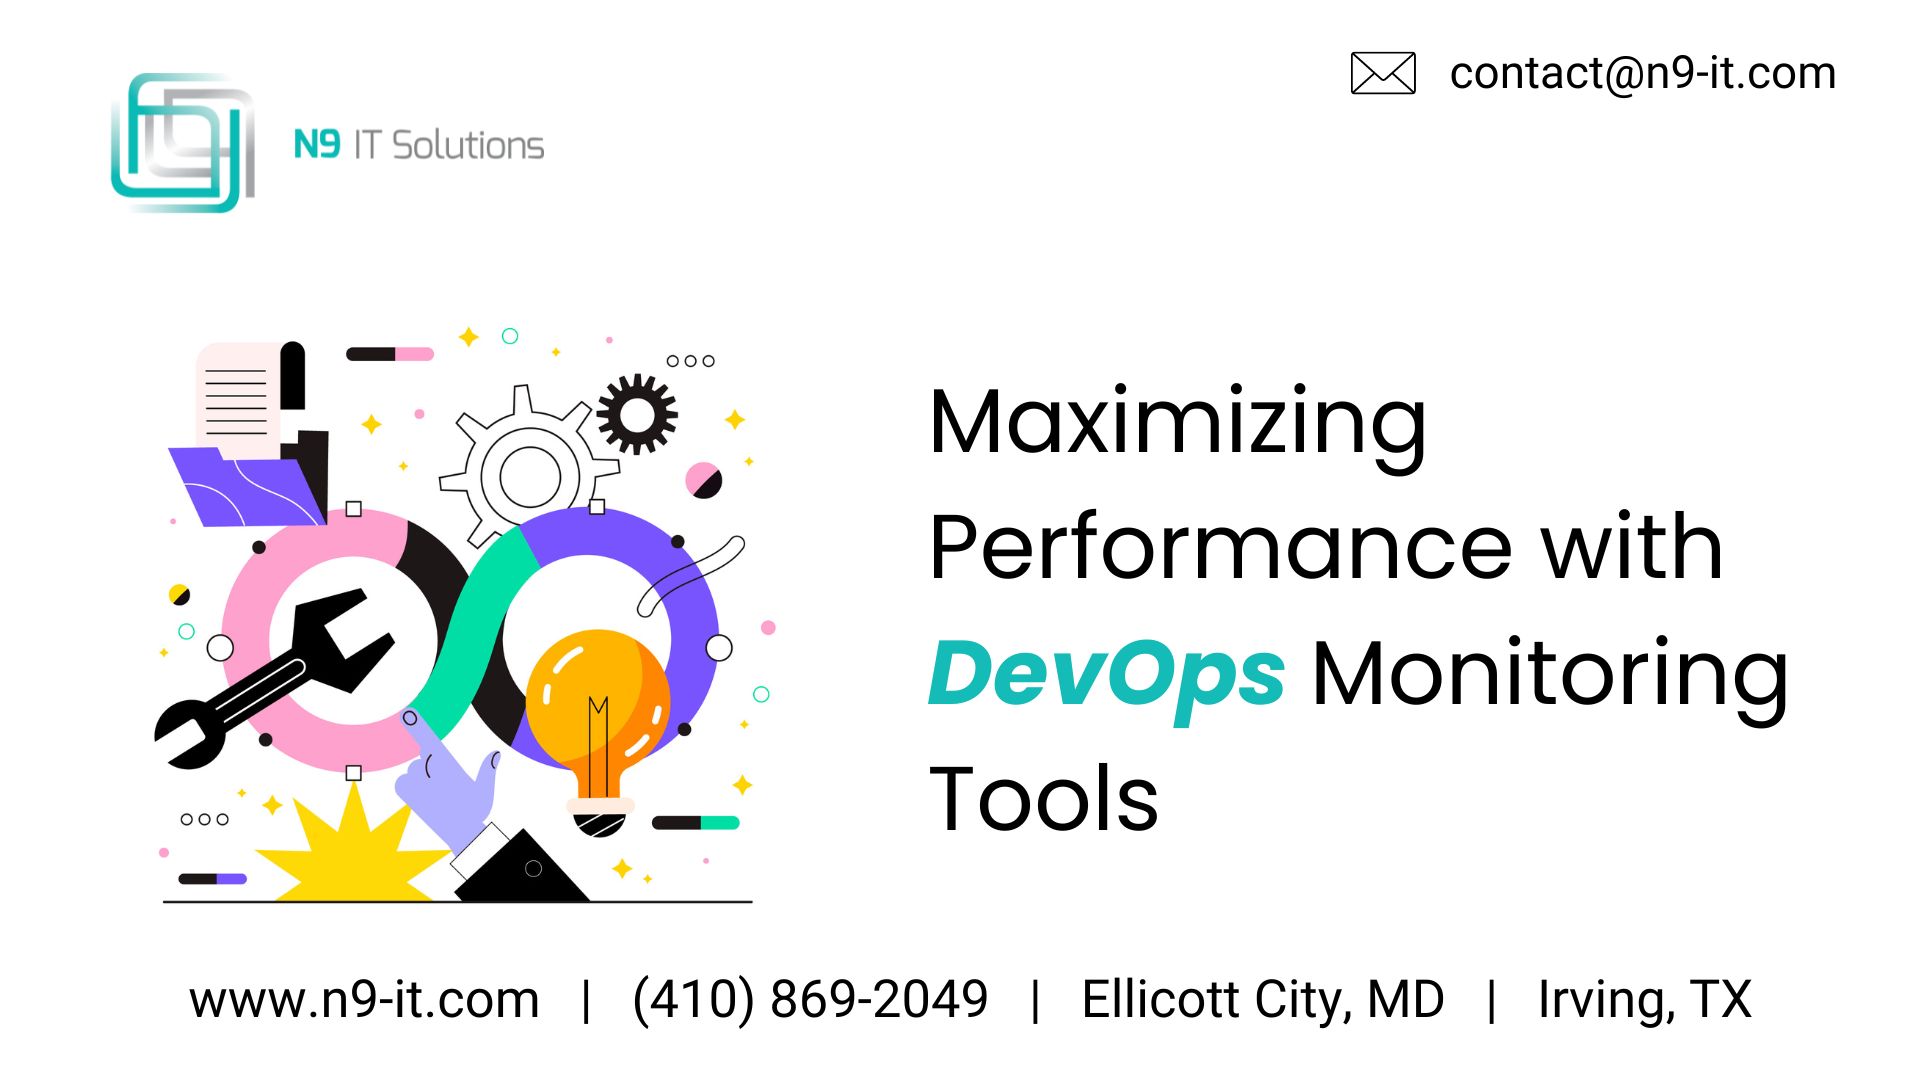 Maximizing Performance with DevOps Monitoring Tools